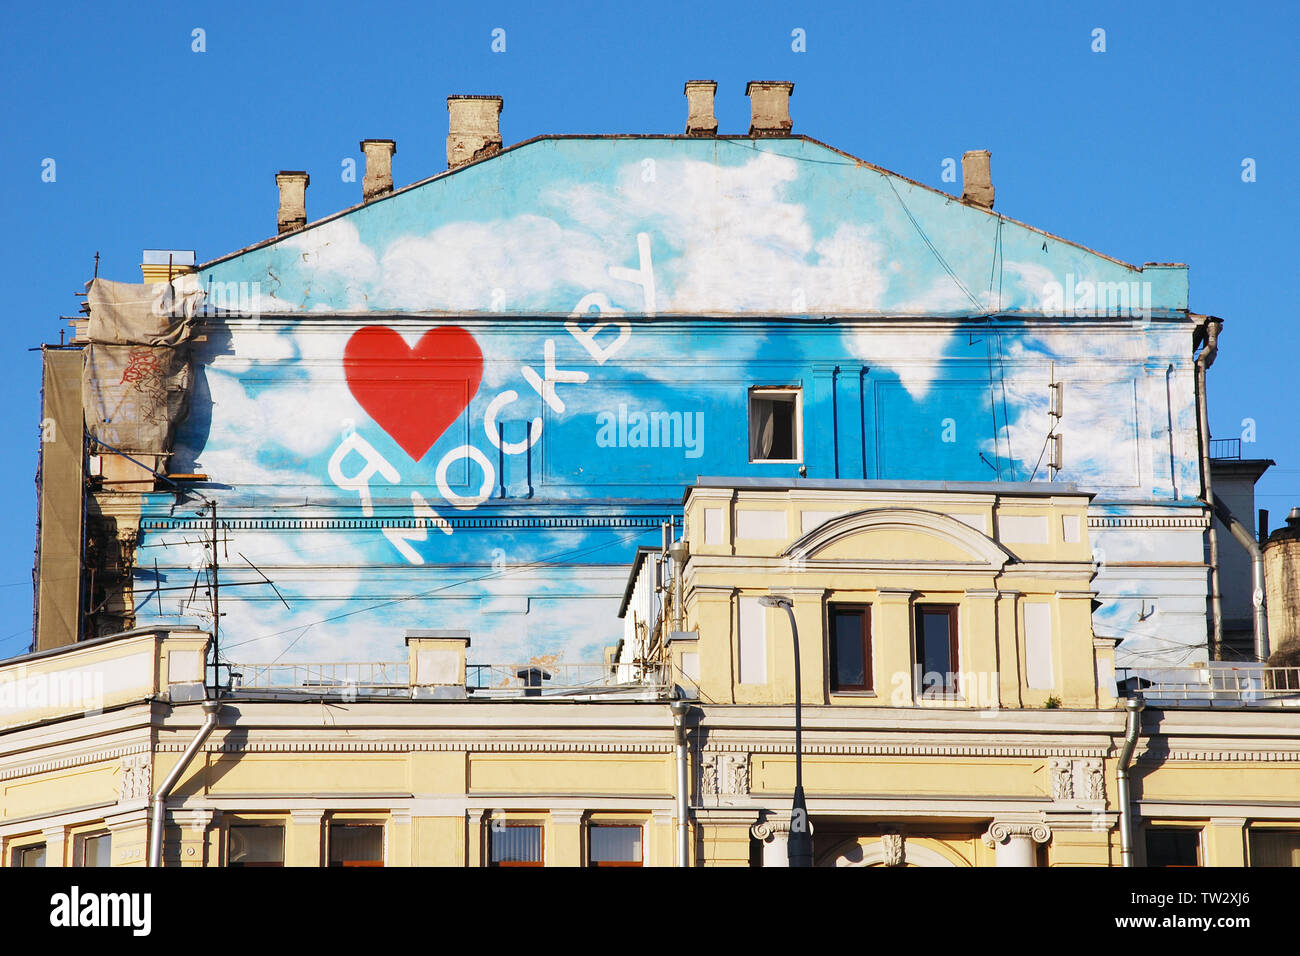 Inscription on old house roof in Russian 'I love Moscow', red heart, blue sky, white clouds, pale yellow walls,open windows, chimneys, downpipes Stock Photo